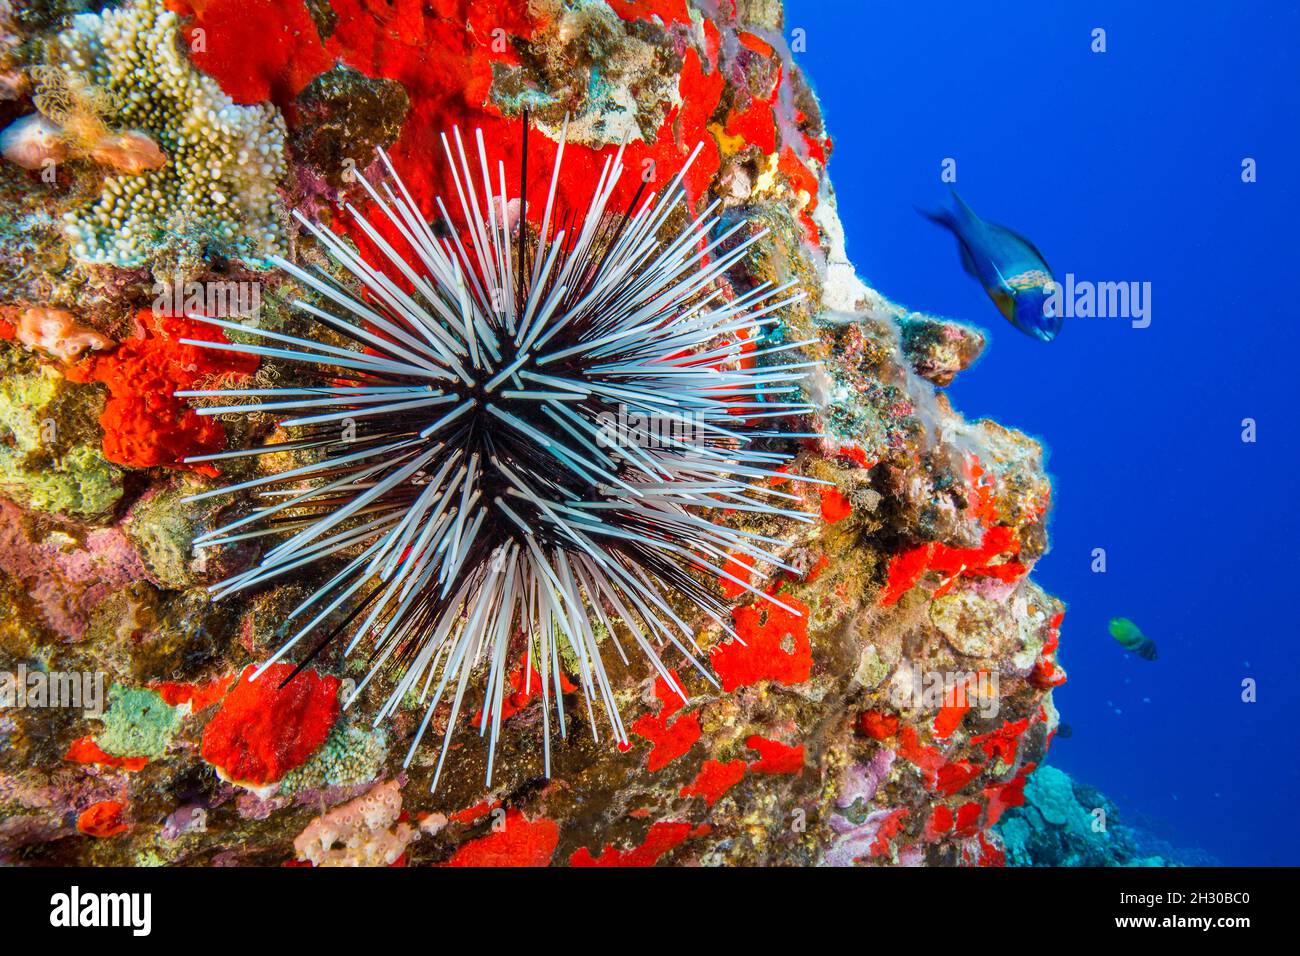 Banded sea urchin, Echinothrix calamaris, are often found clinging to vertical surfaces, Hawaii. Stock Photo